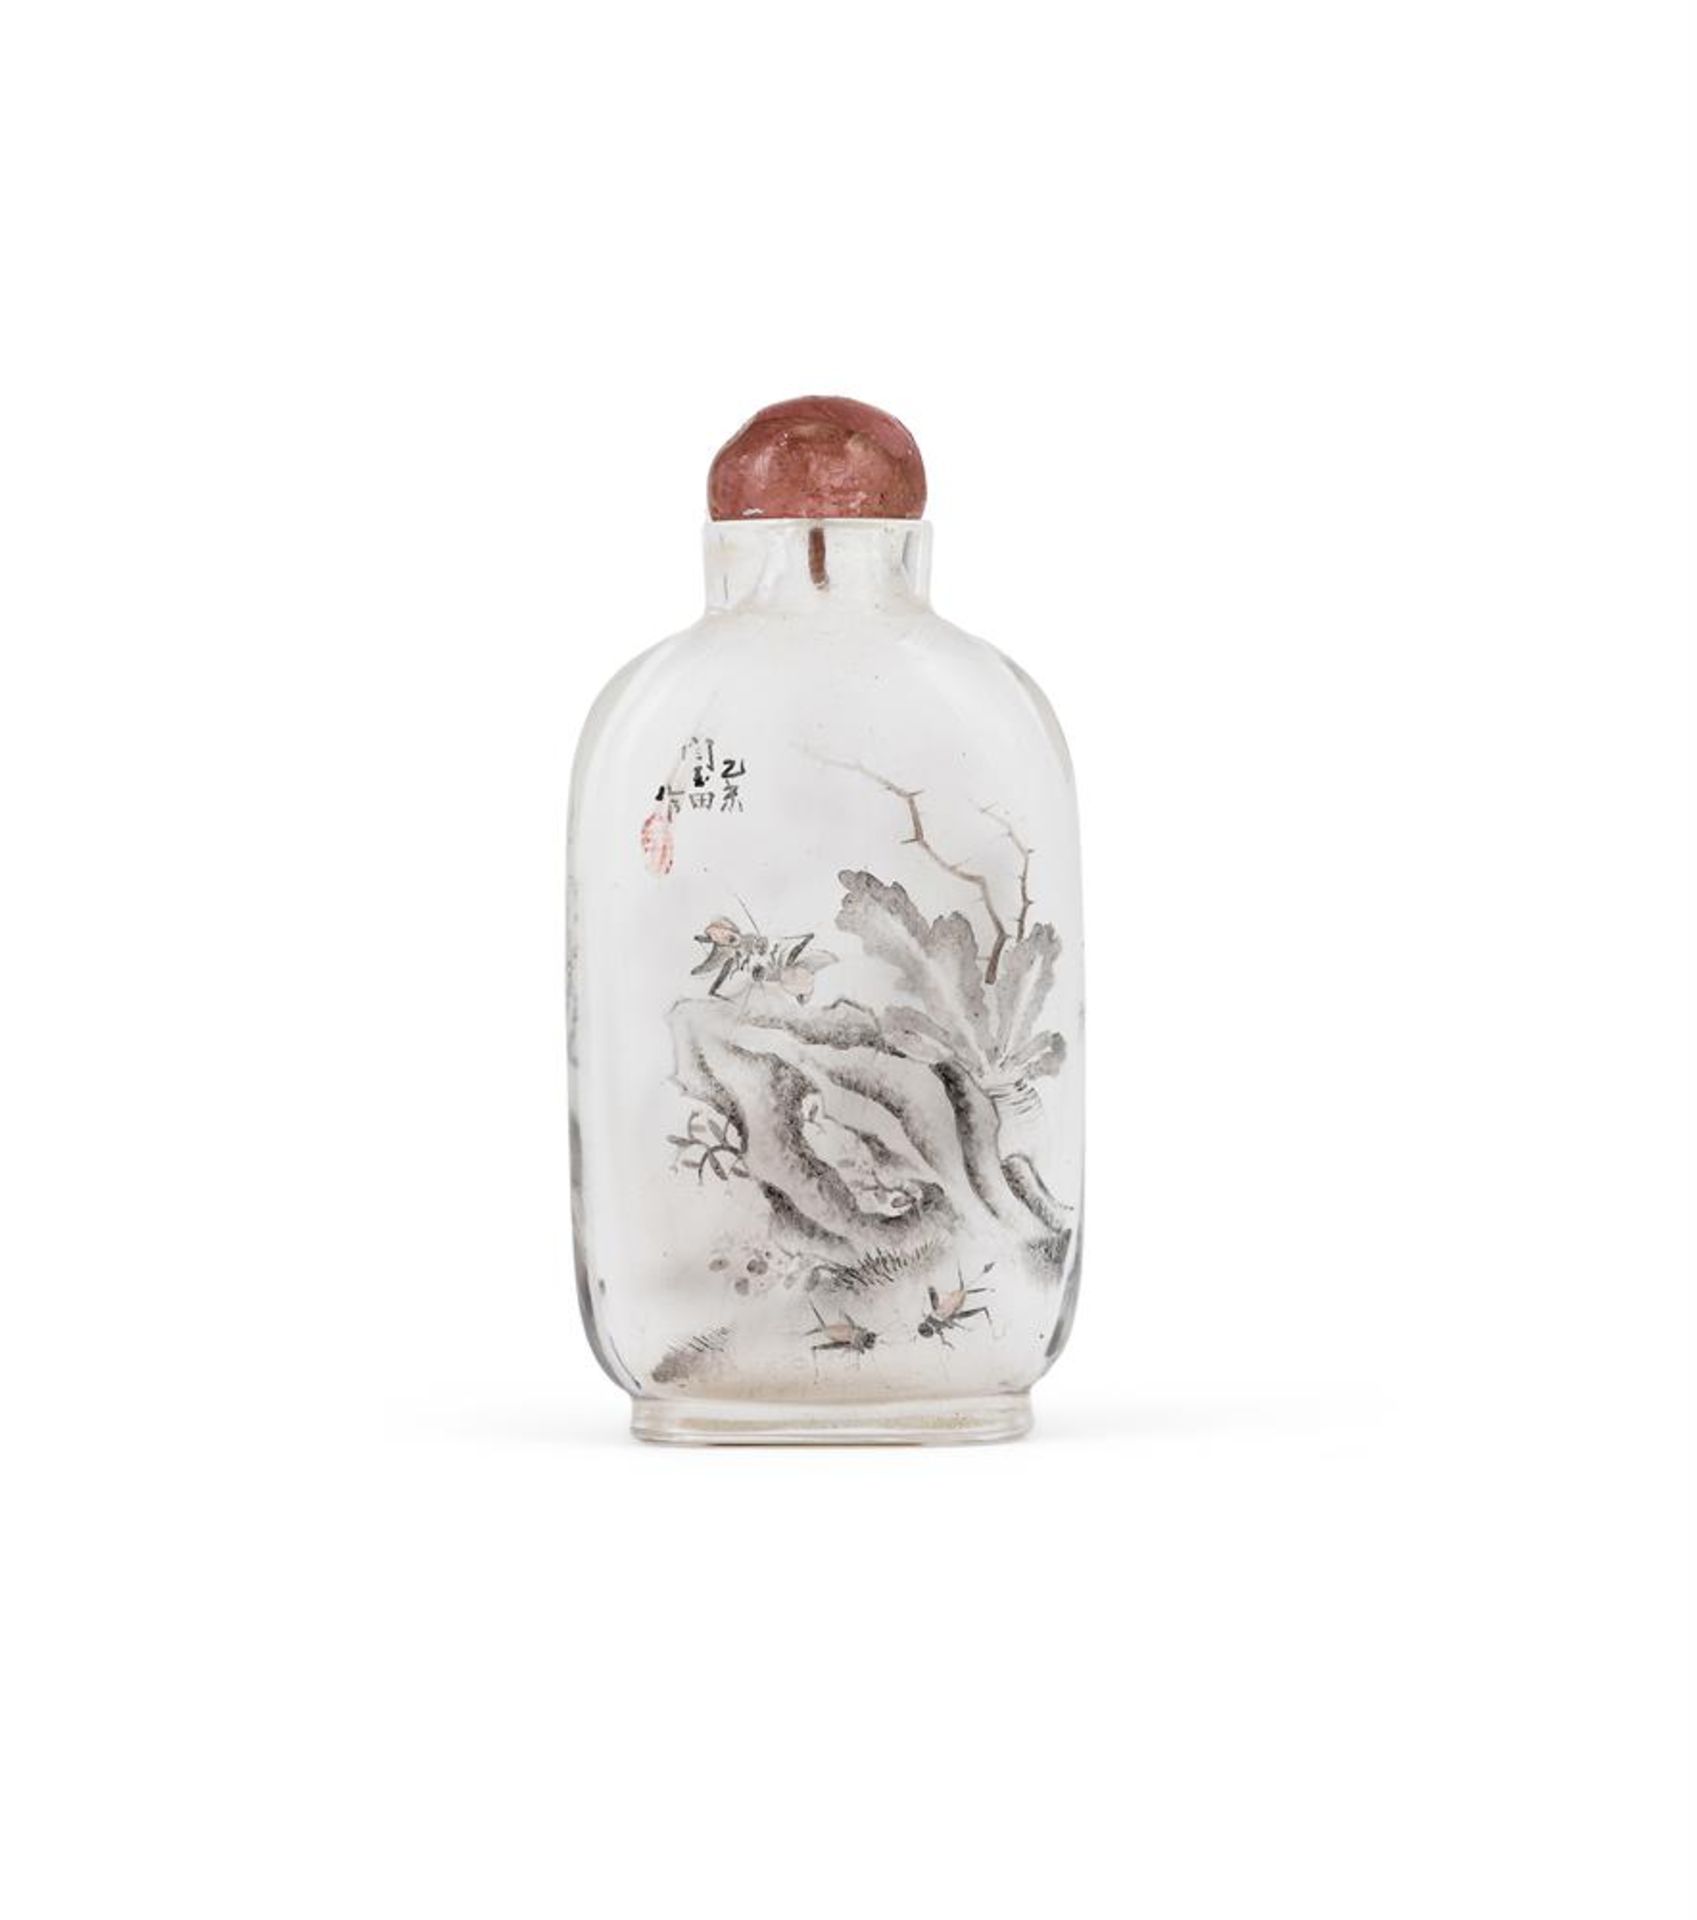 A CHINESE INSIDE-PAINTED GLASS SNUFF BOTTLE, QING DYNASTY